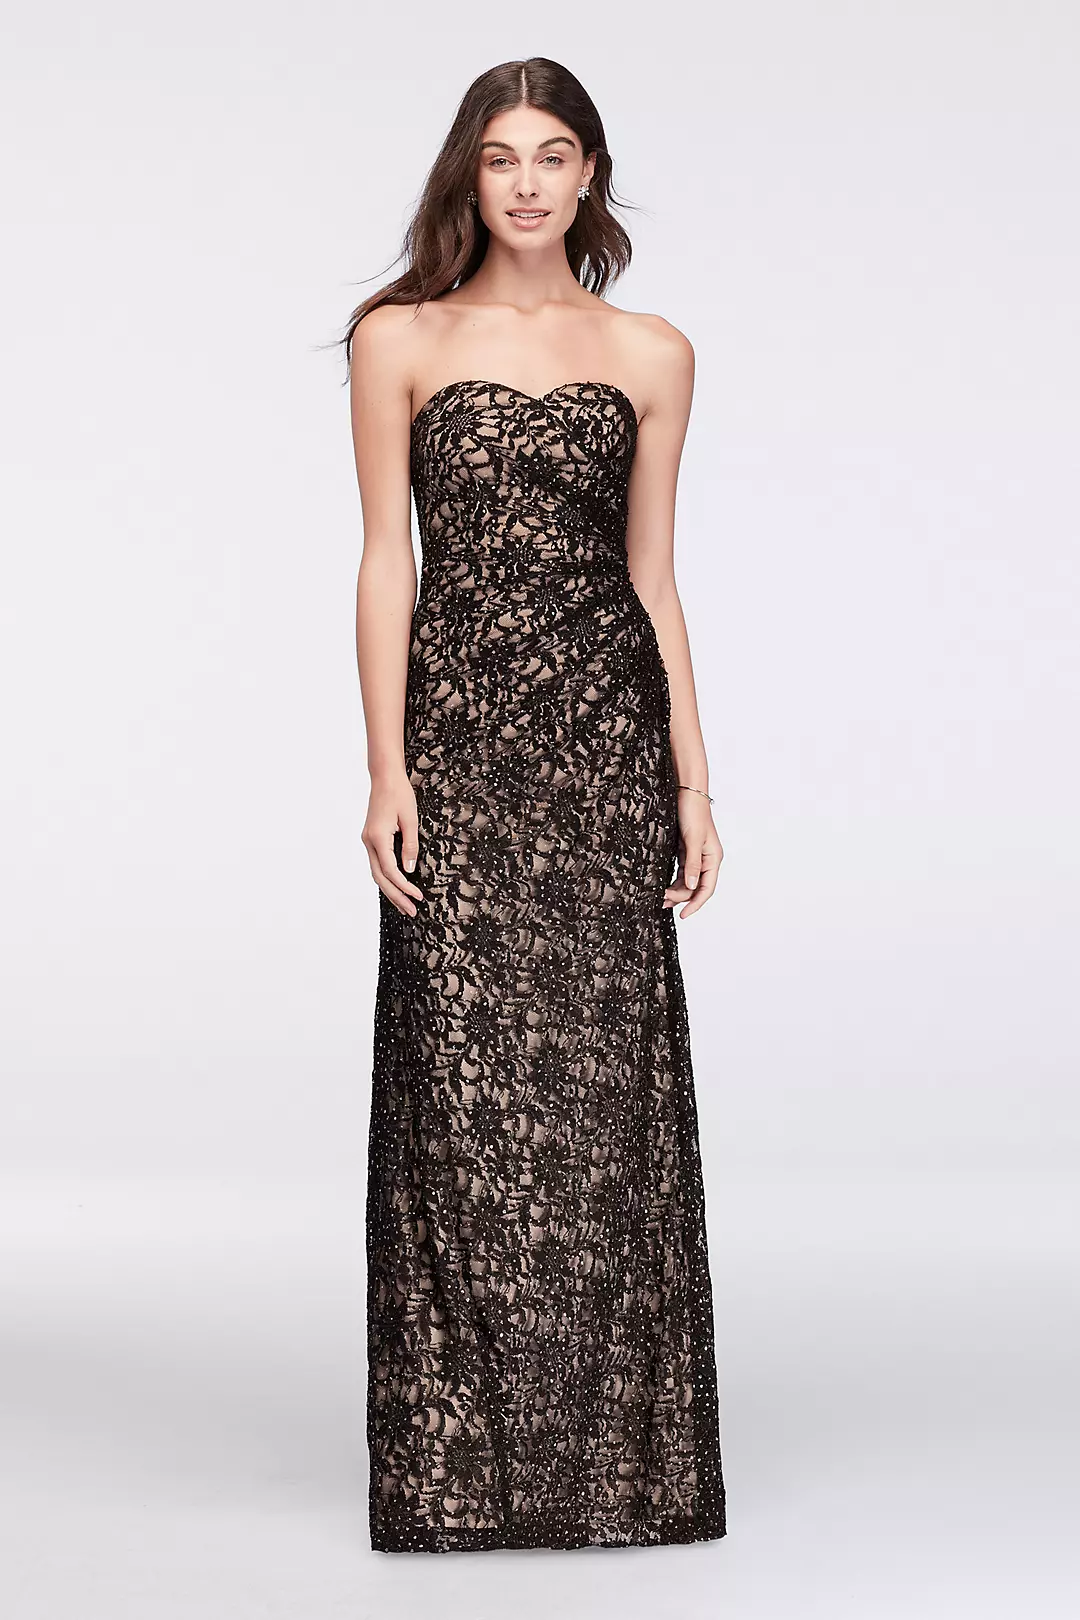 Floral Lace Strapless Dress with Side Gathering Image